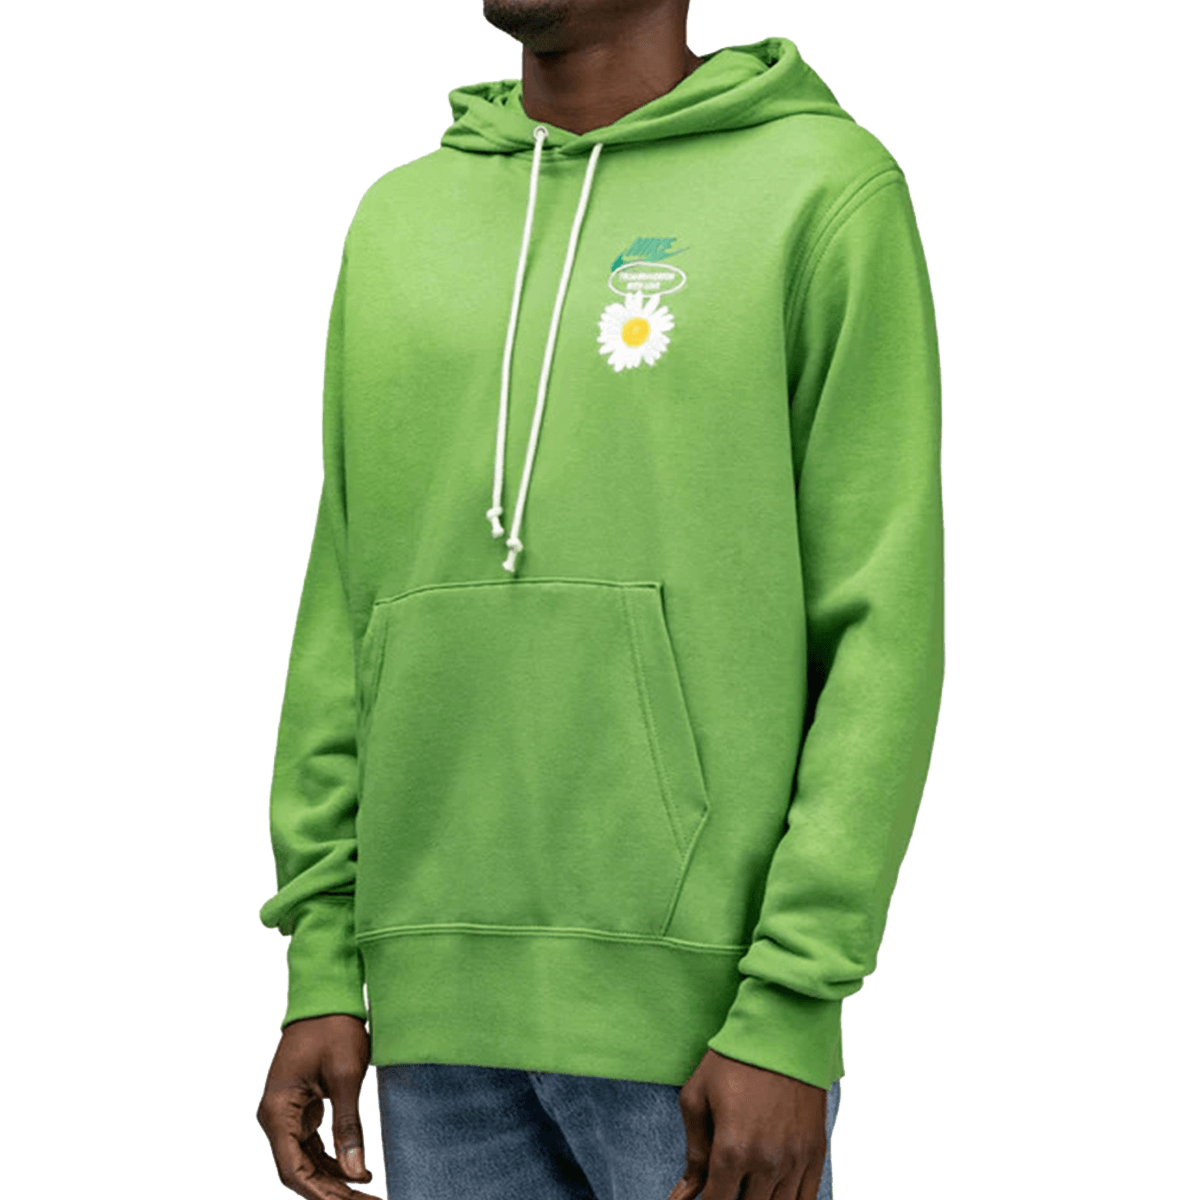 NKG FRENCH TERRY PULLOVER HOOD french